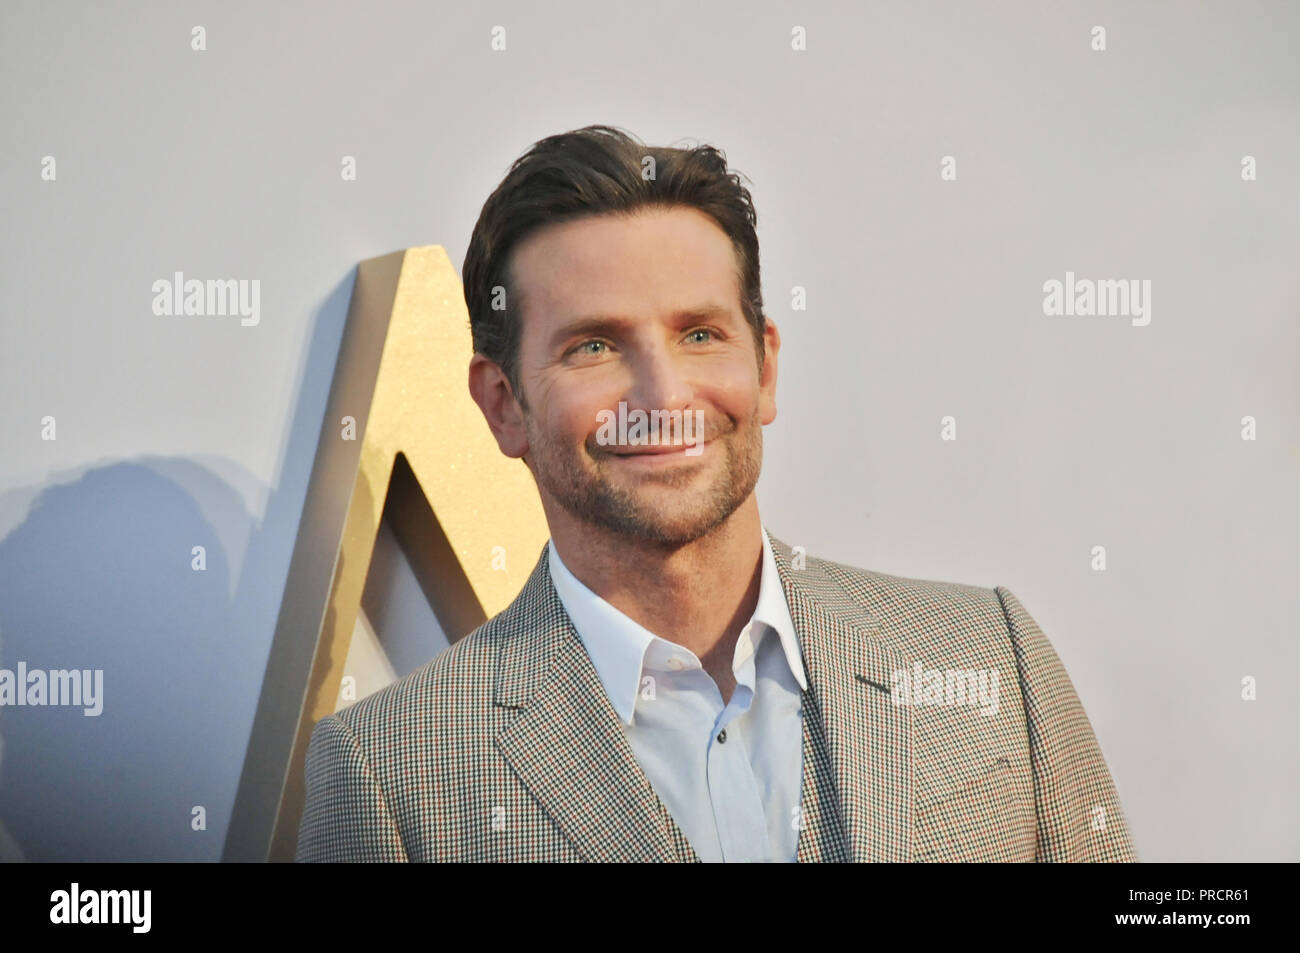 Actor, producer and director of A Star is Born, Bradley Cooper, at the London film premiere of his film. Stock Photo